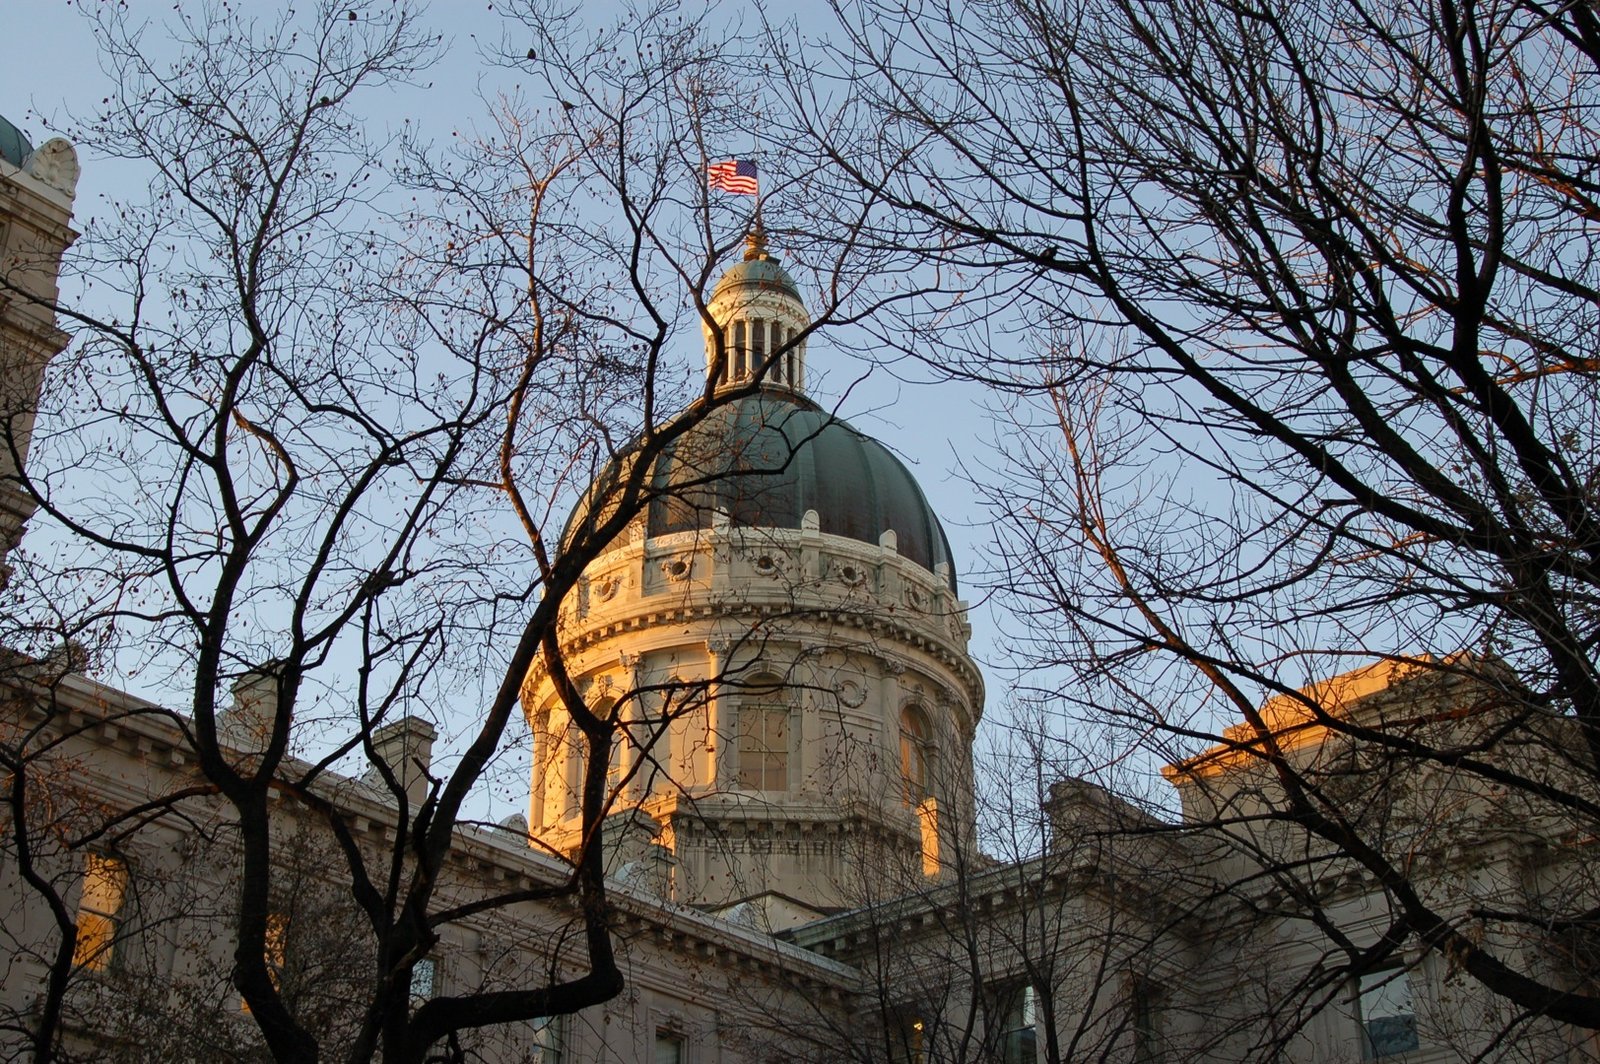 A busy year for access bills at the Indiana General Assembly